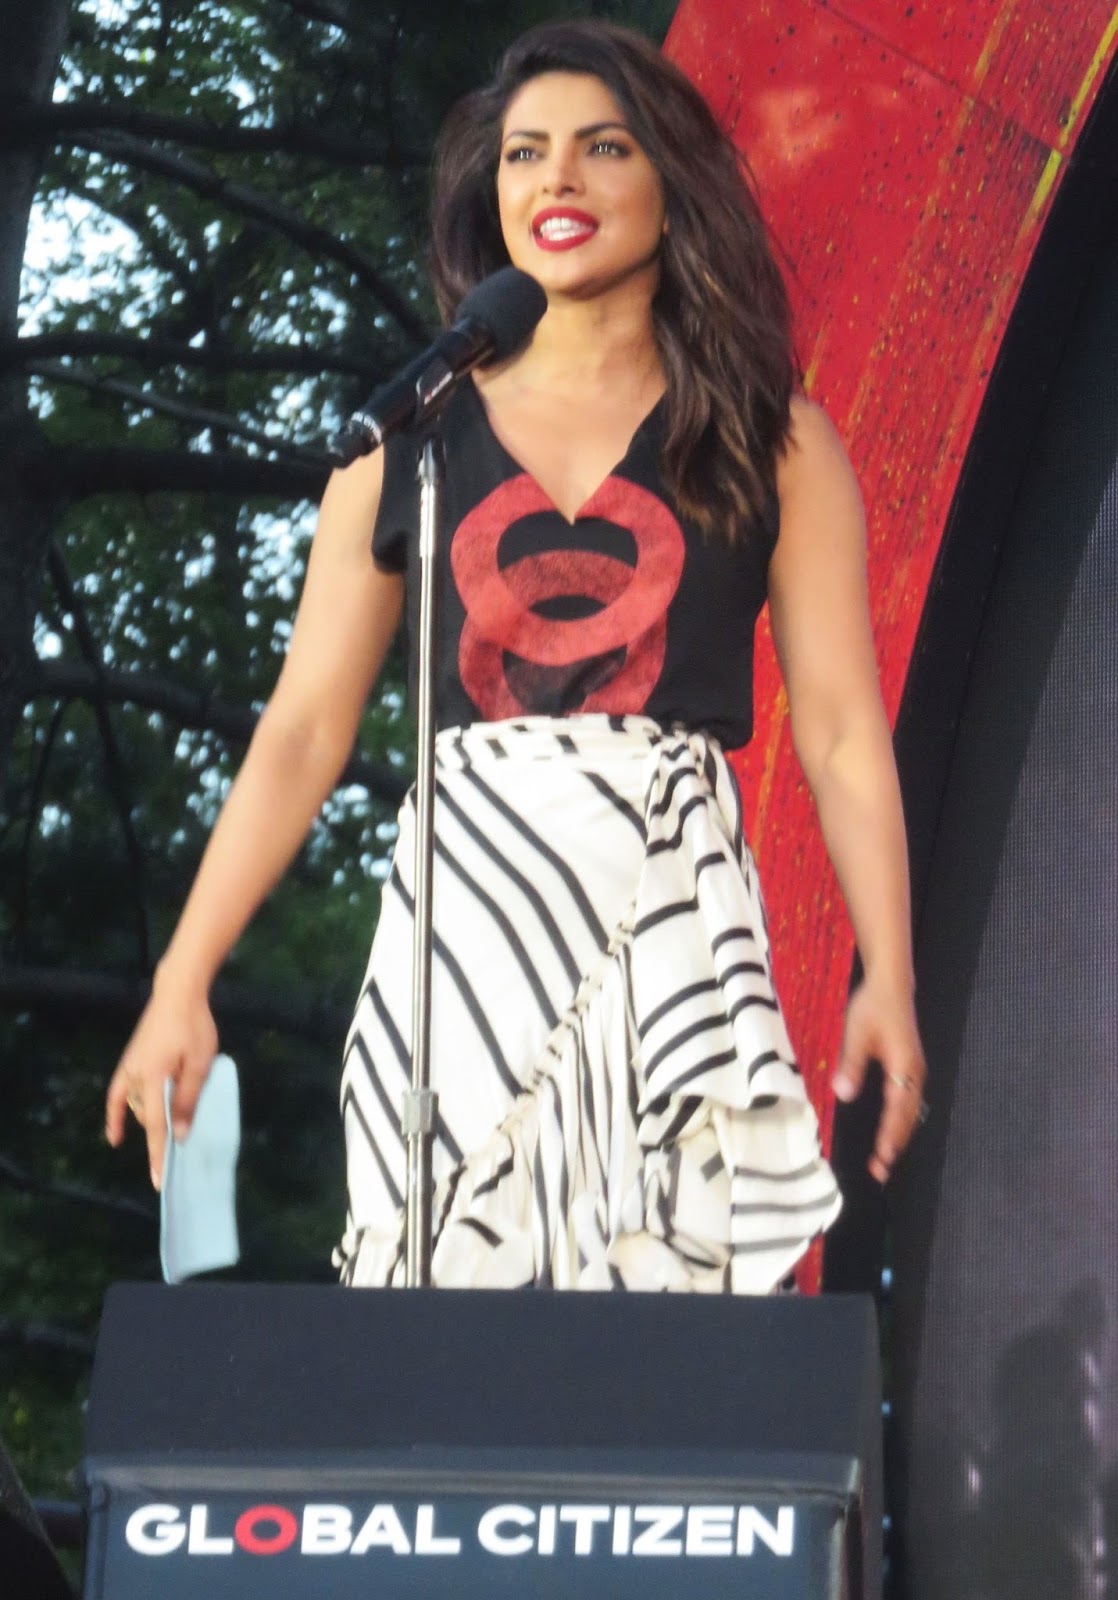 Priyanka Chopra Looks Gorgeous As She Speaks Onstage at Global Citizen Festival 2016 at Central Park in New York City